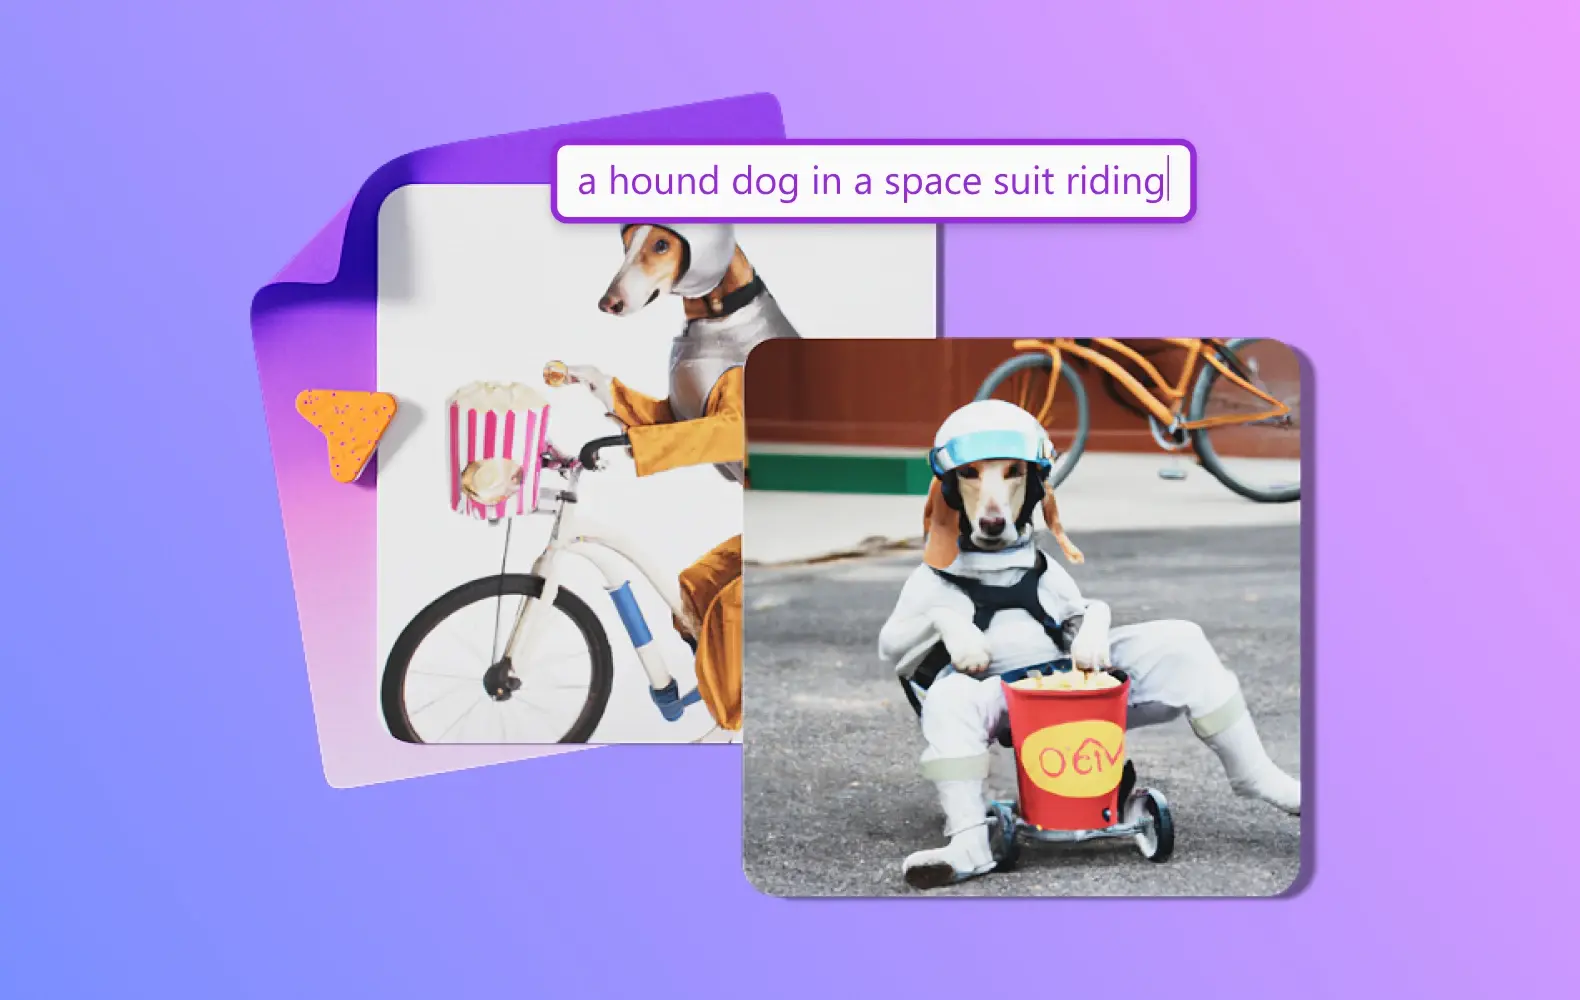 An image of a dog in a spacesuit riding a bike, created by DALL-E in Designer. 